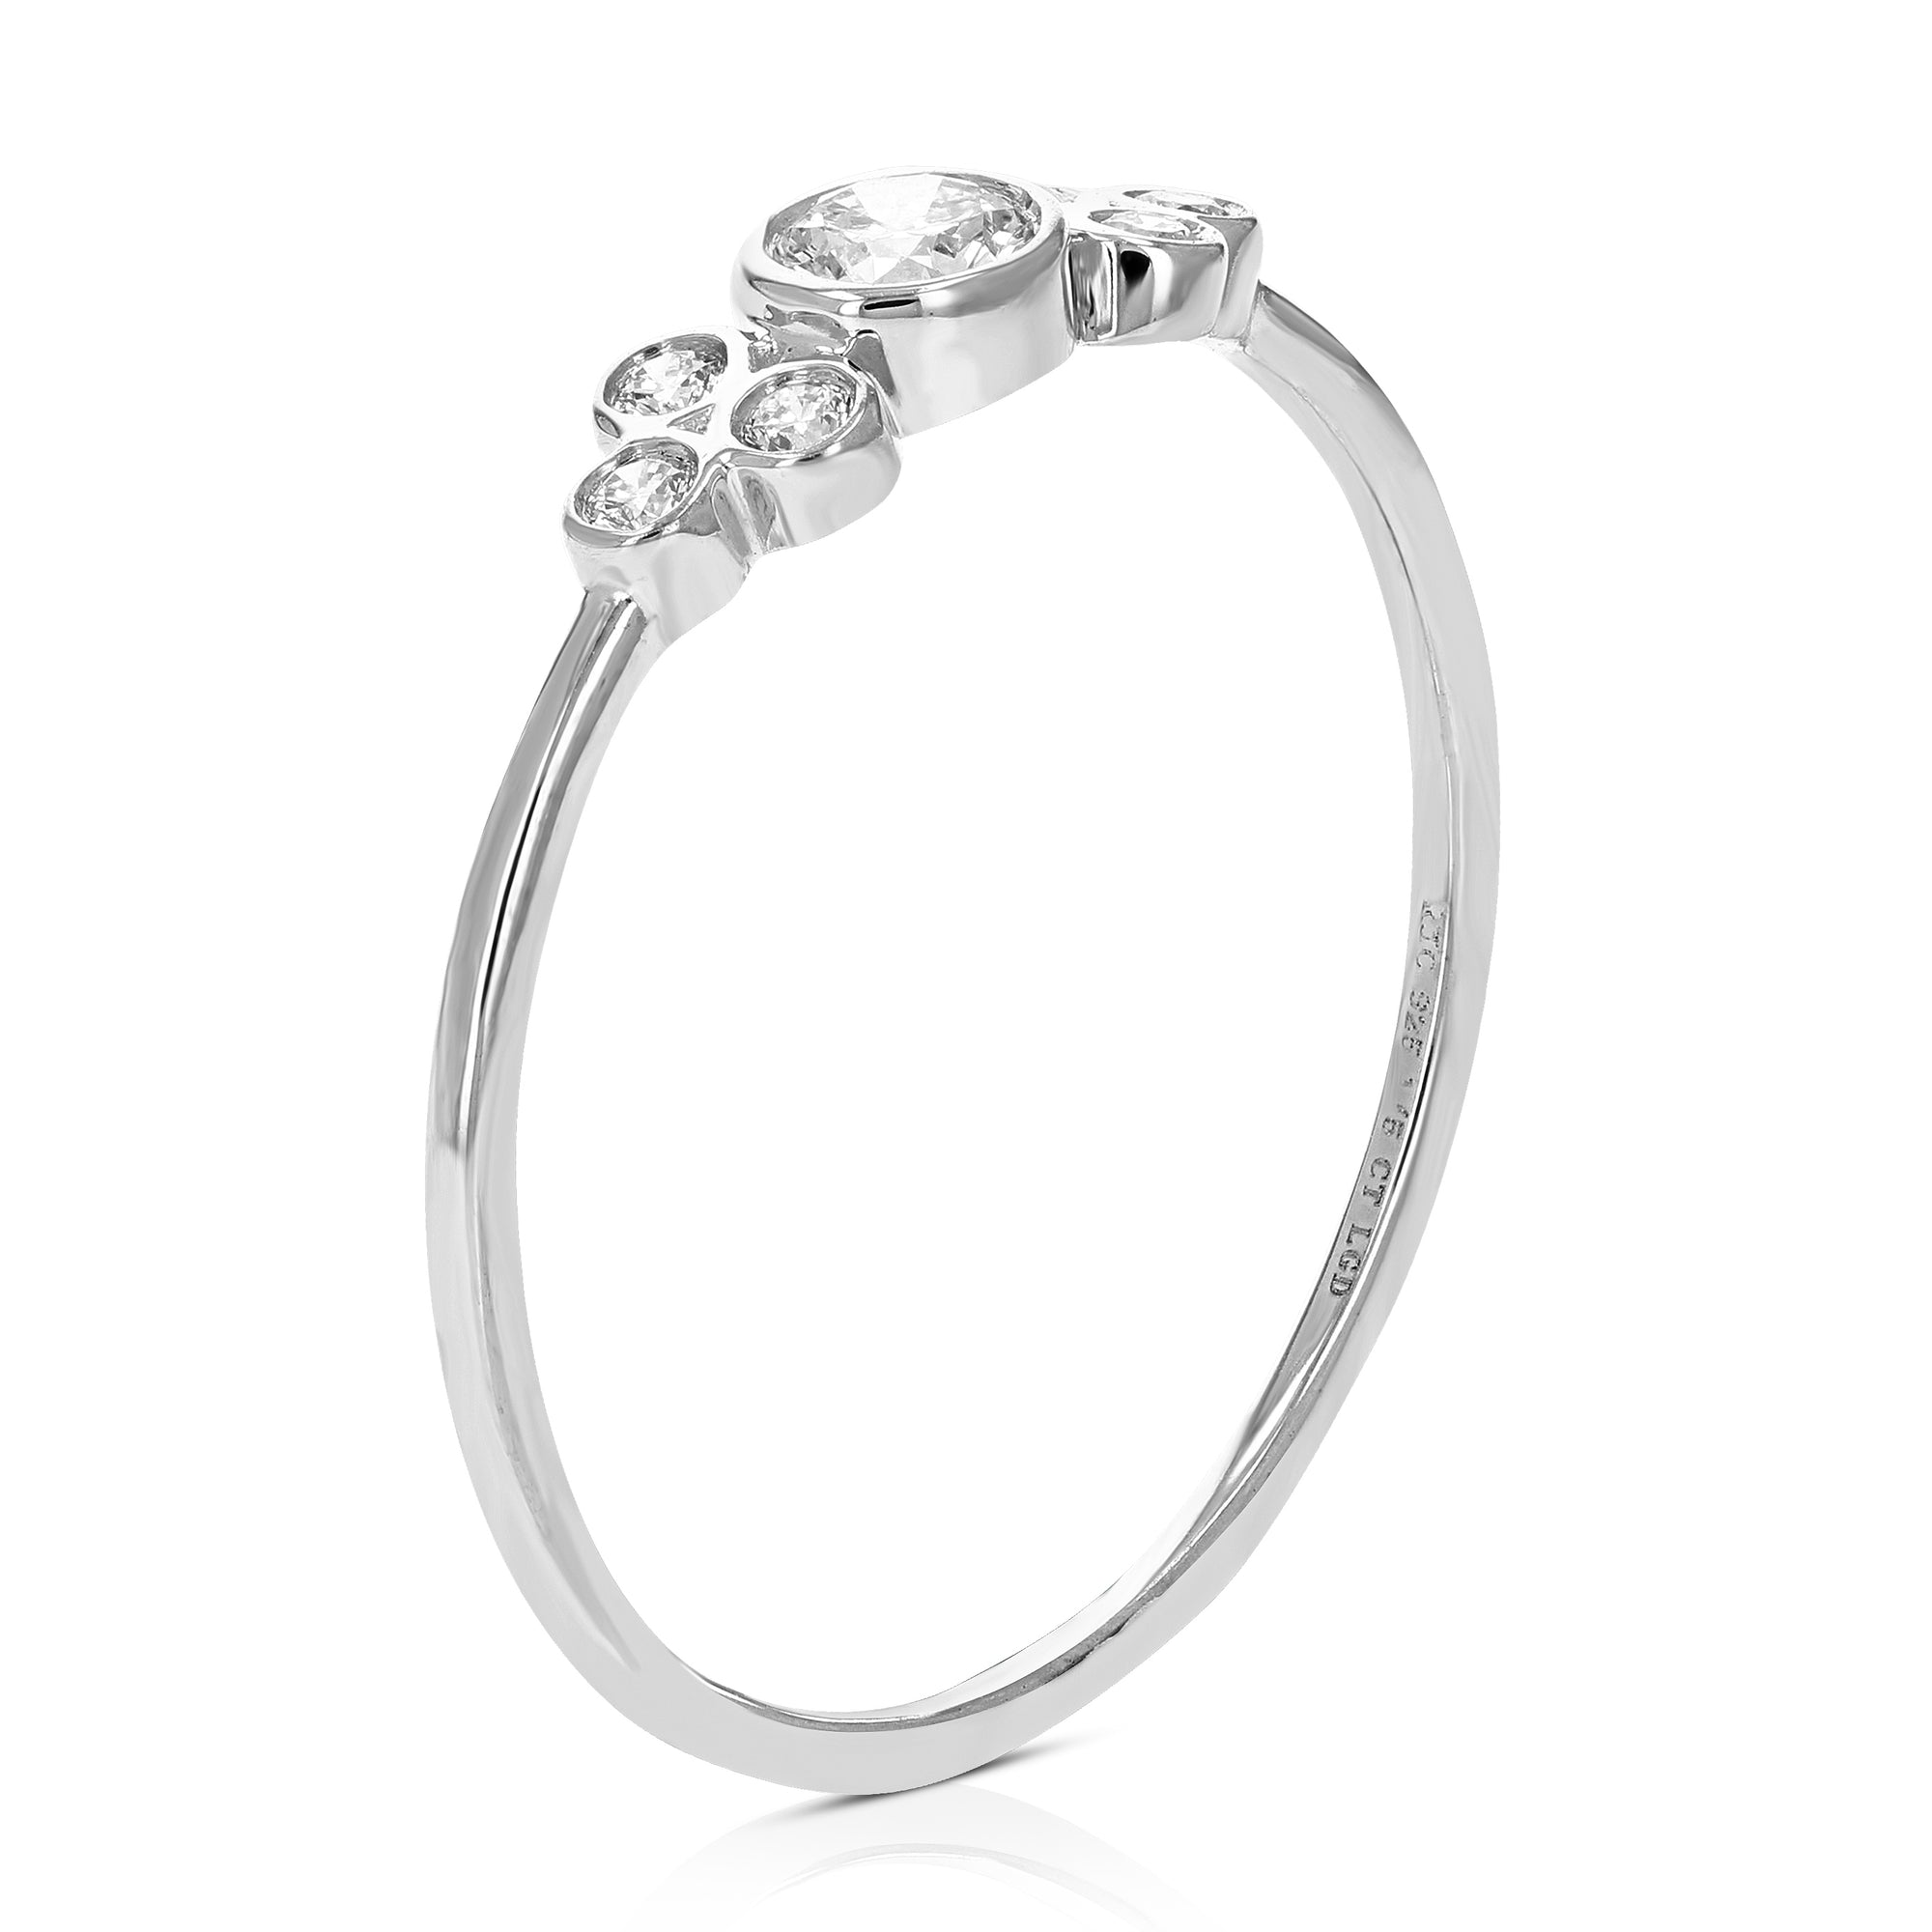 1/5 cttw Diamond Engagement Ring for Women, Round Lab Grown Diamond Engagement Ring in .925 Sterling Silver, Prong Setting